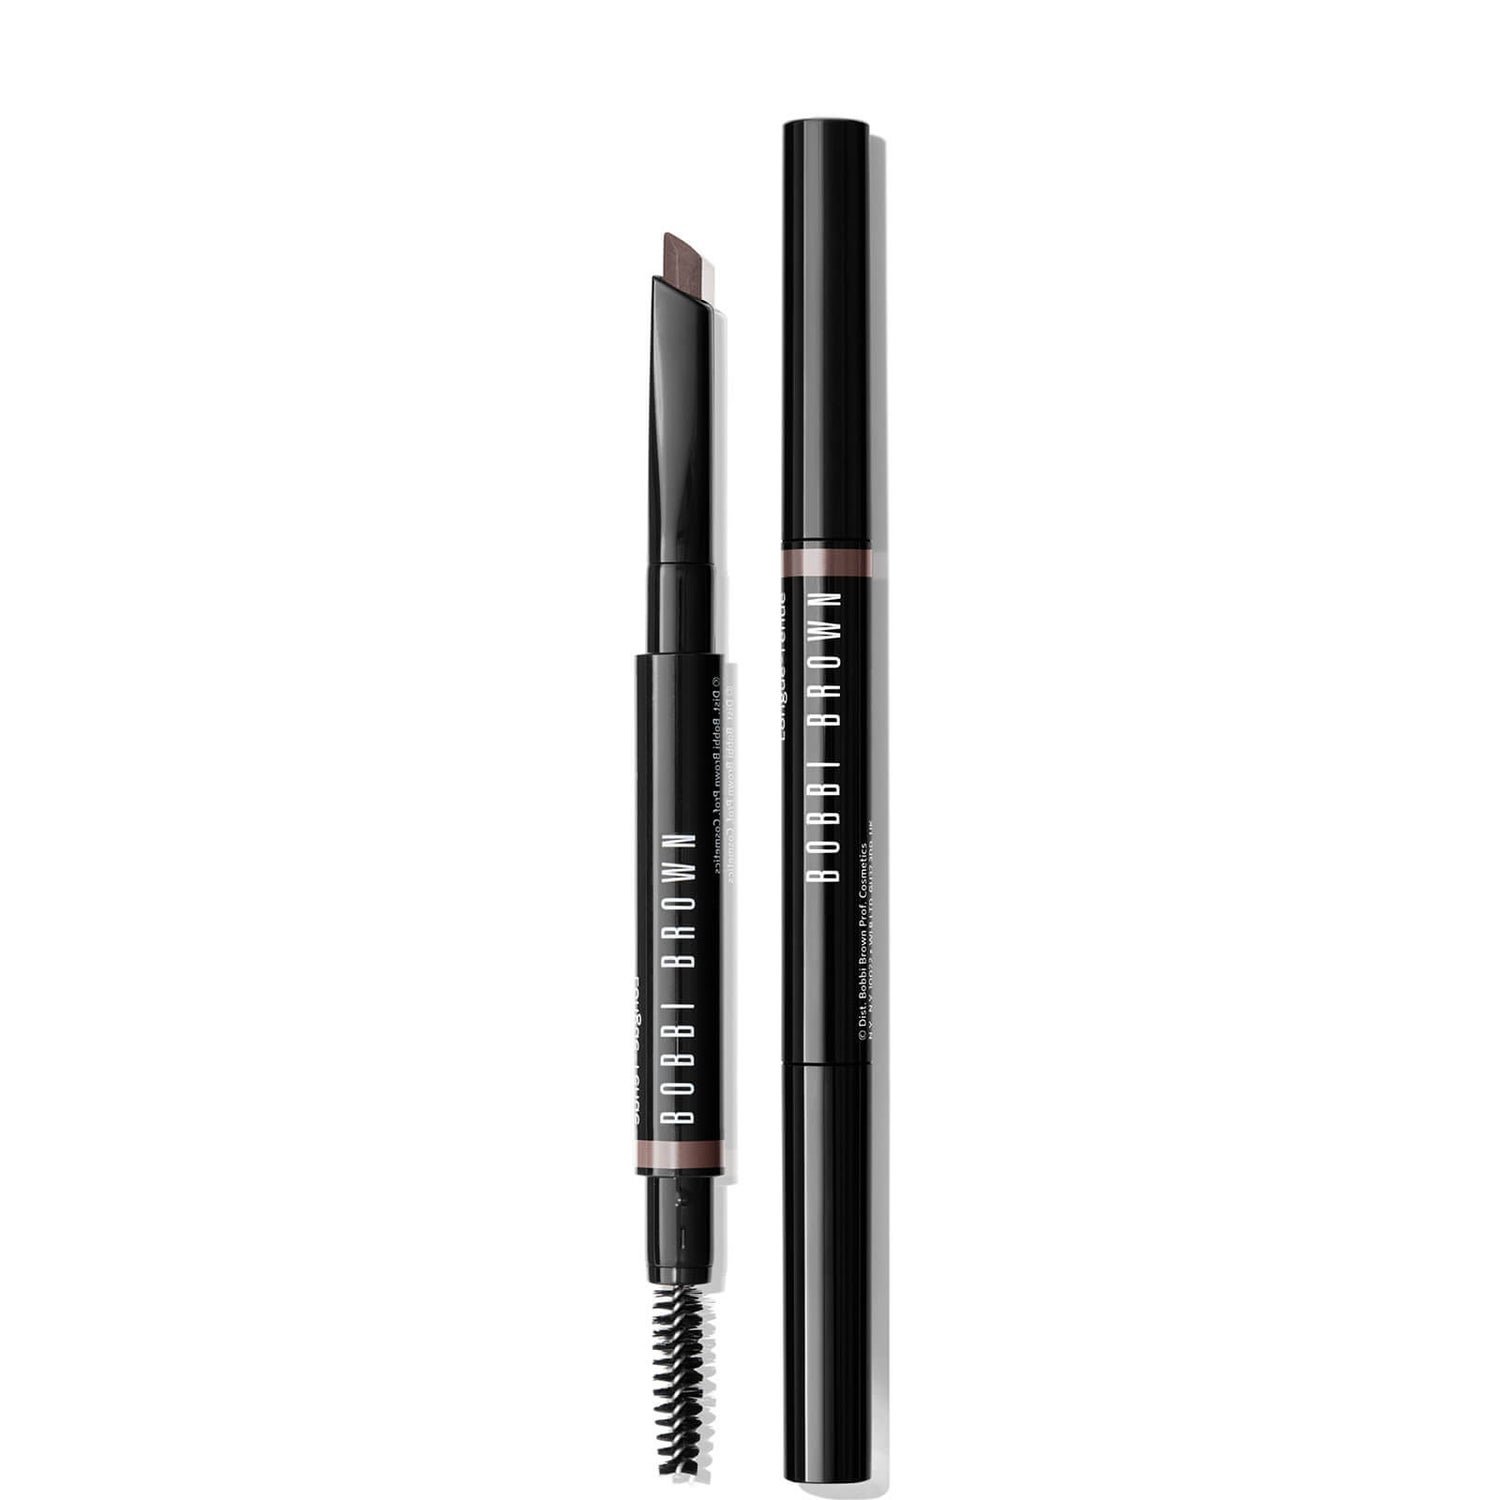 Bobbi Brown Perfectly Defined Long-Wear Brow Pencil 0.33g (Various Shades)